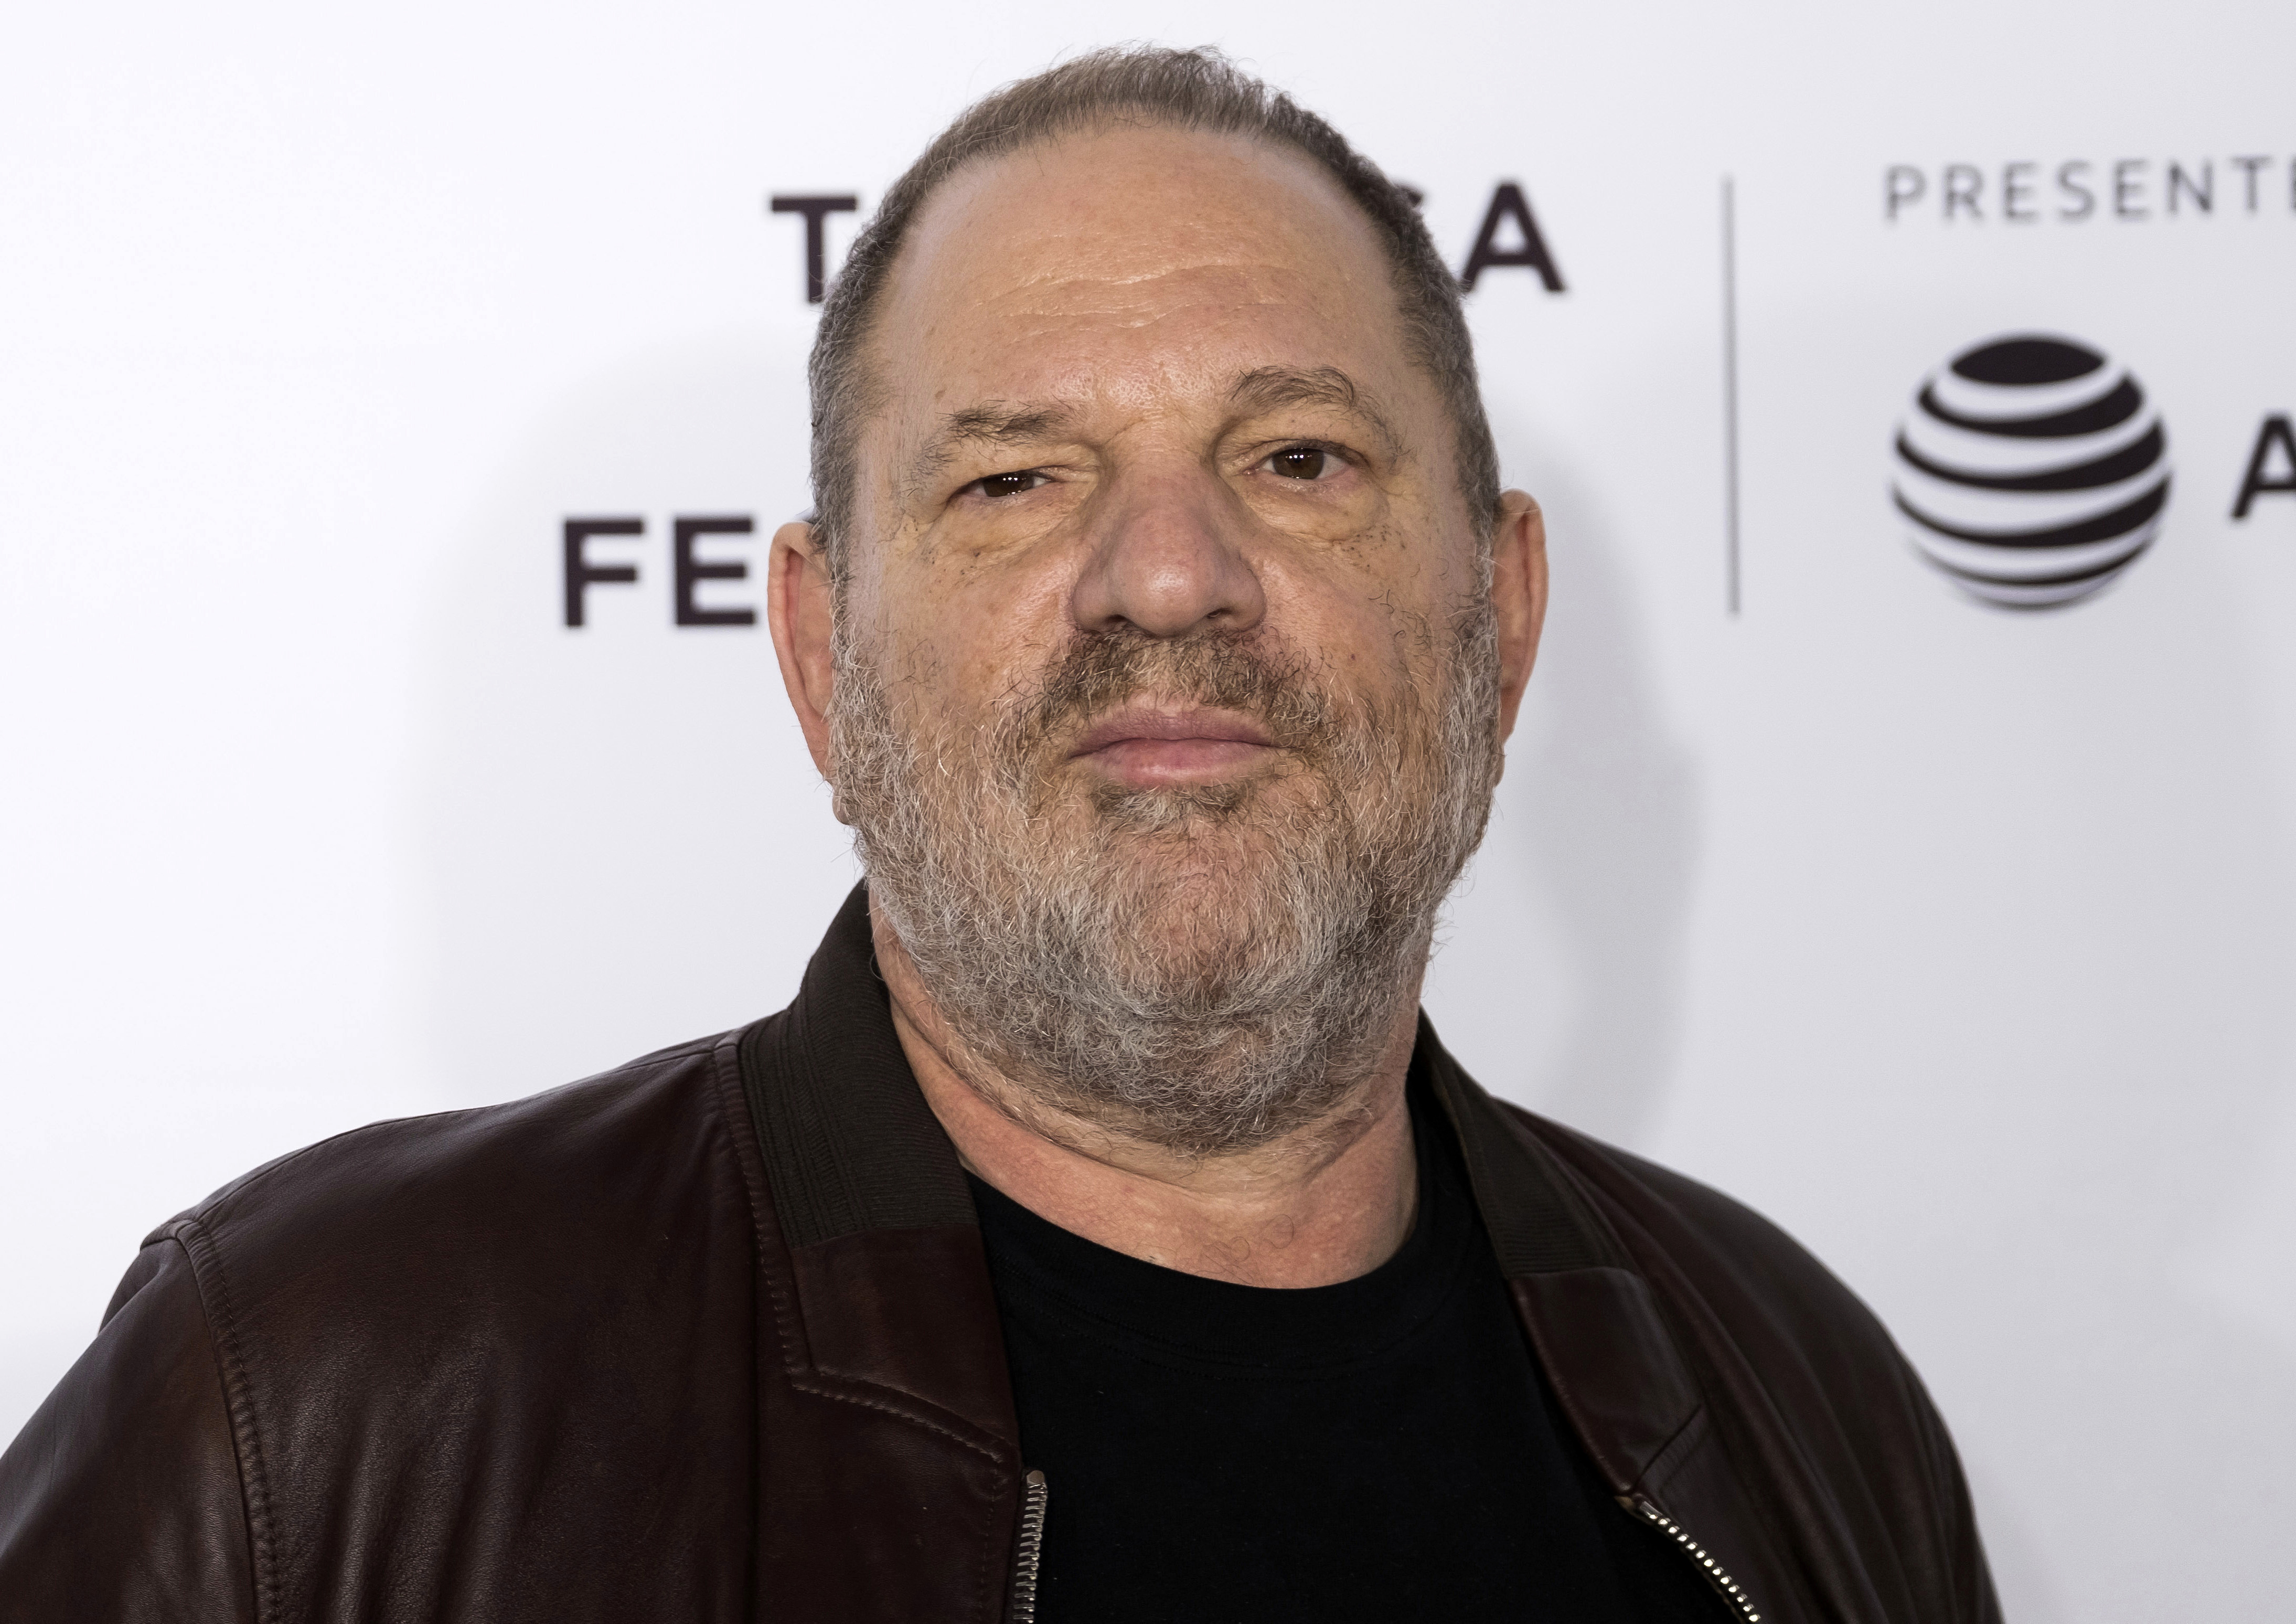 In this April 28, 2017 file photo, Harvey Weinstein attends the "Reservoir Dogs" 25th anniversary screening during the 2017 Tribeca Film Festival in New York. (Charles Sykes—Charles Sykes/Invision/AP)